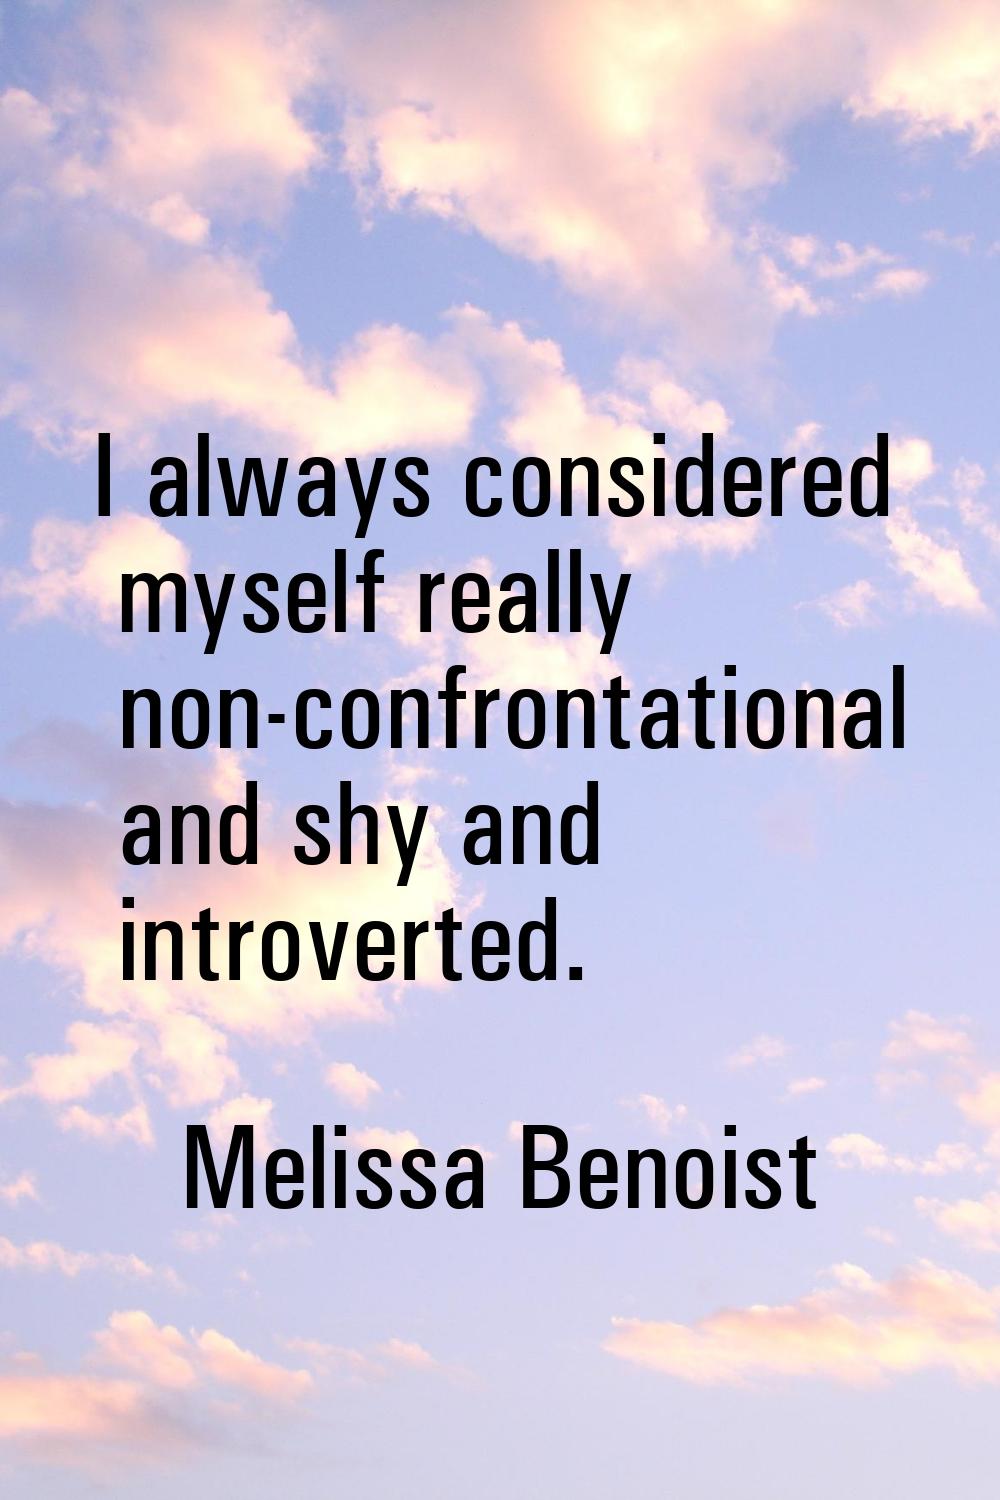 I always considered myself really non-confrontational and shy and introverted.